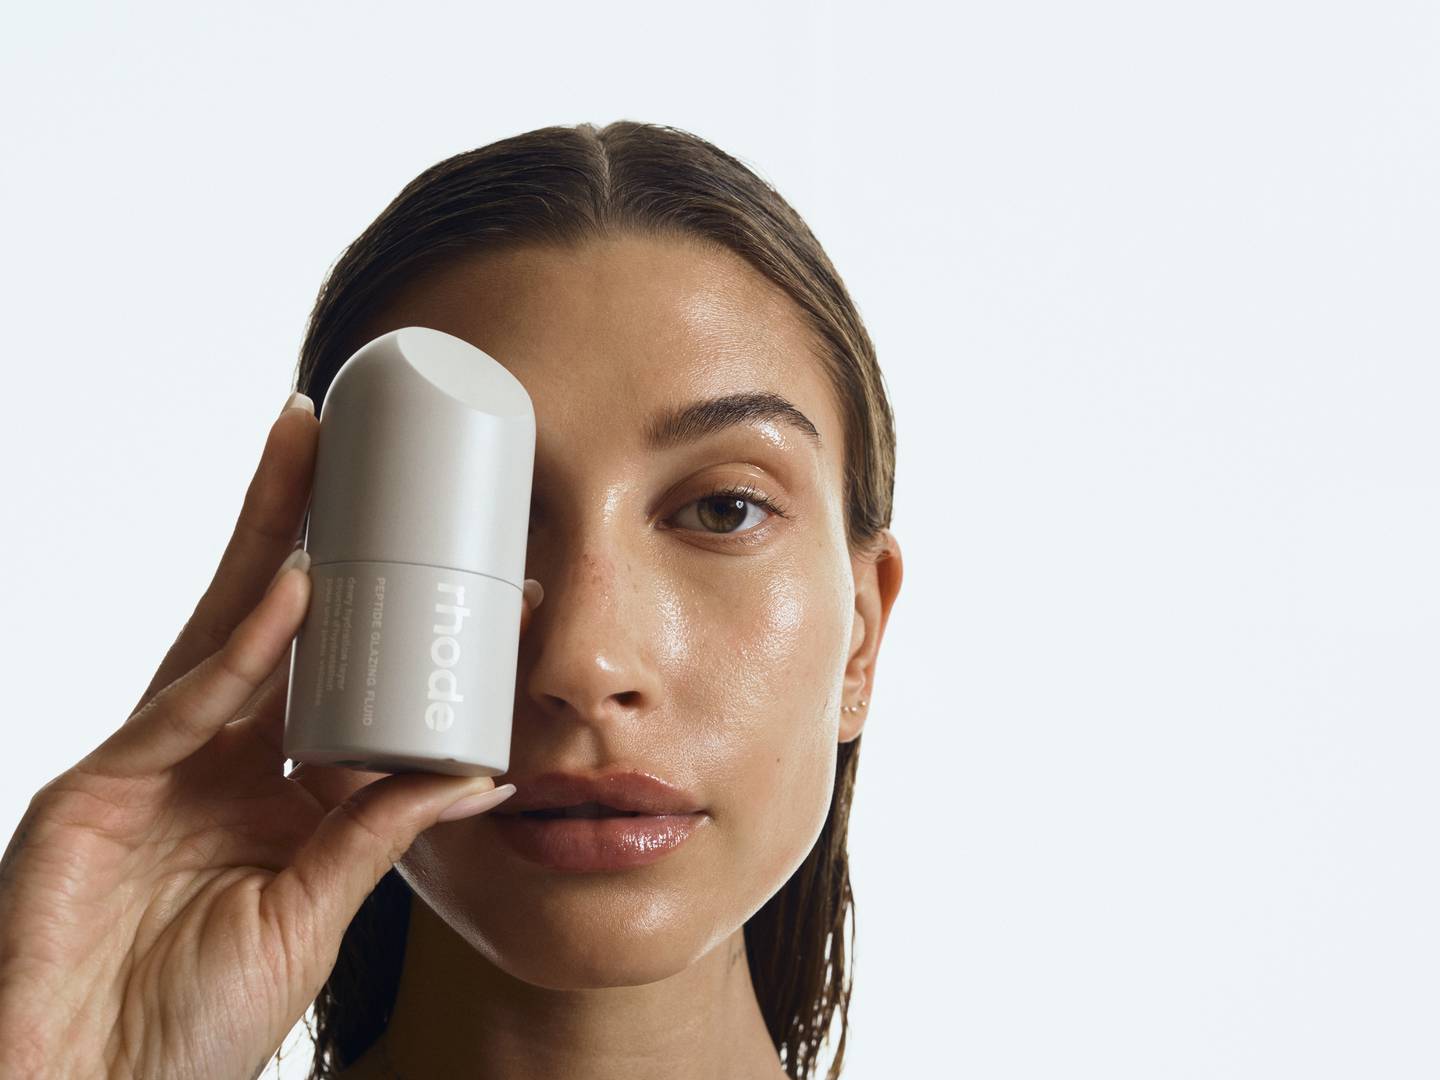 Hailey Bieber's Rhode skin care line is launching into a crowded market for celebrity brands.